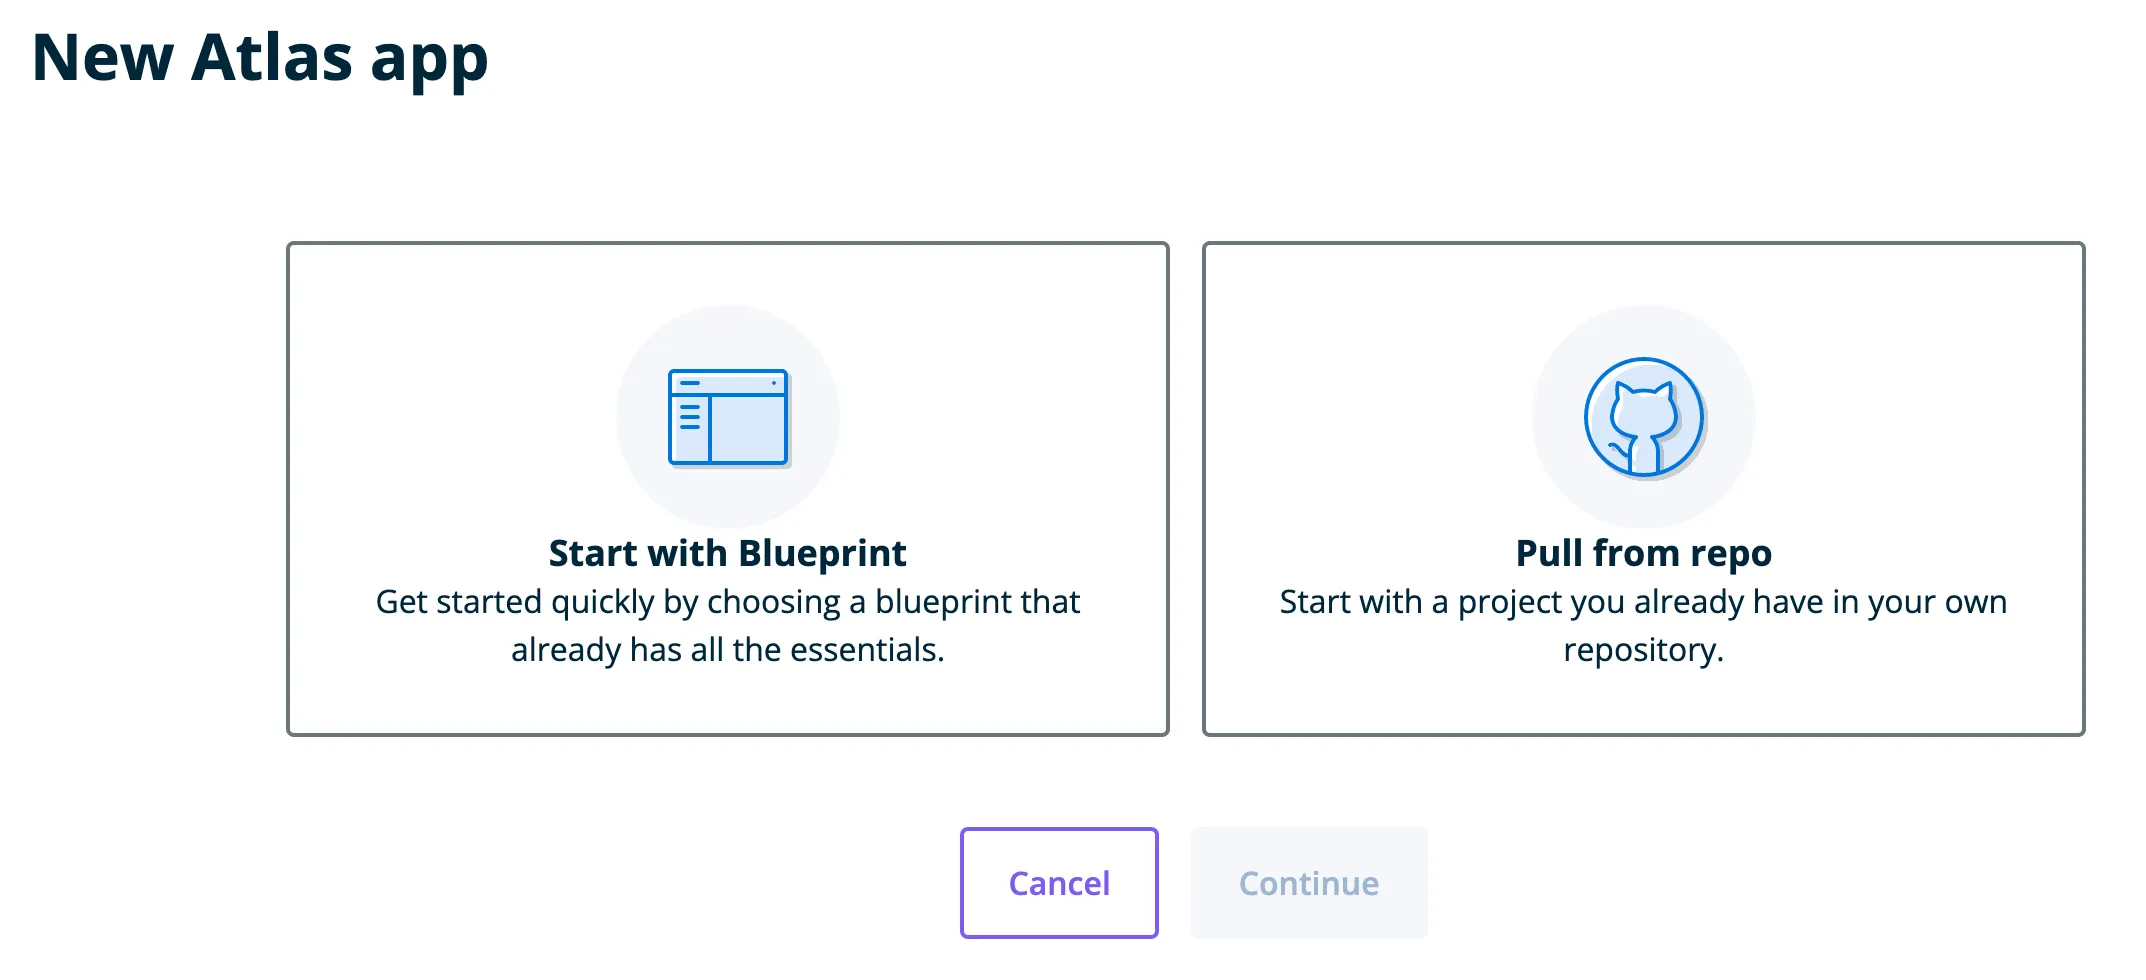 Options to create a new Atlas app including “Start with Blueprint” or “Pull from repo”